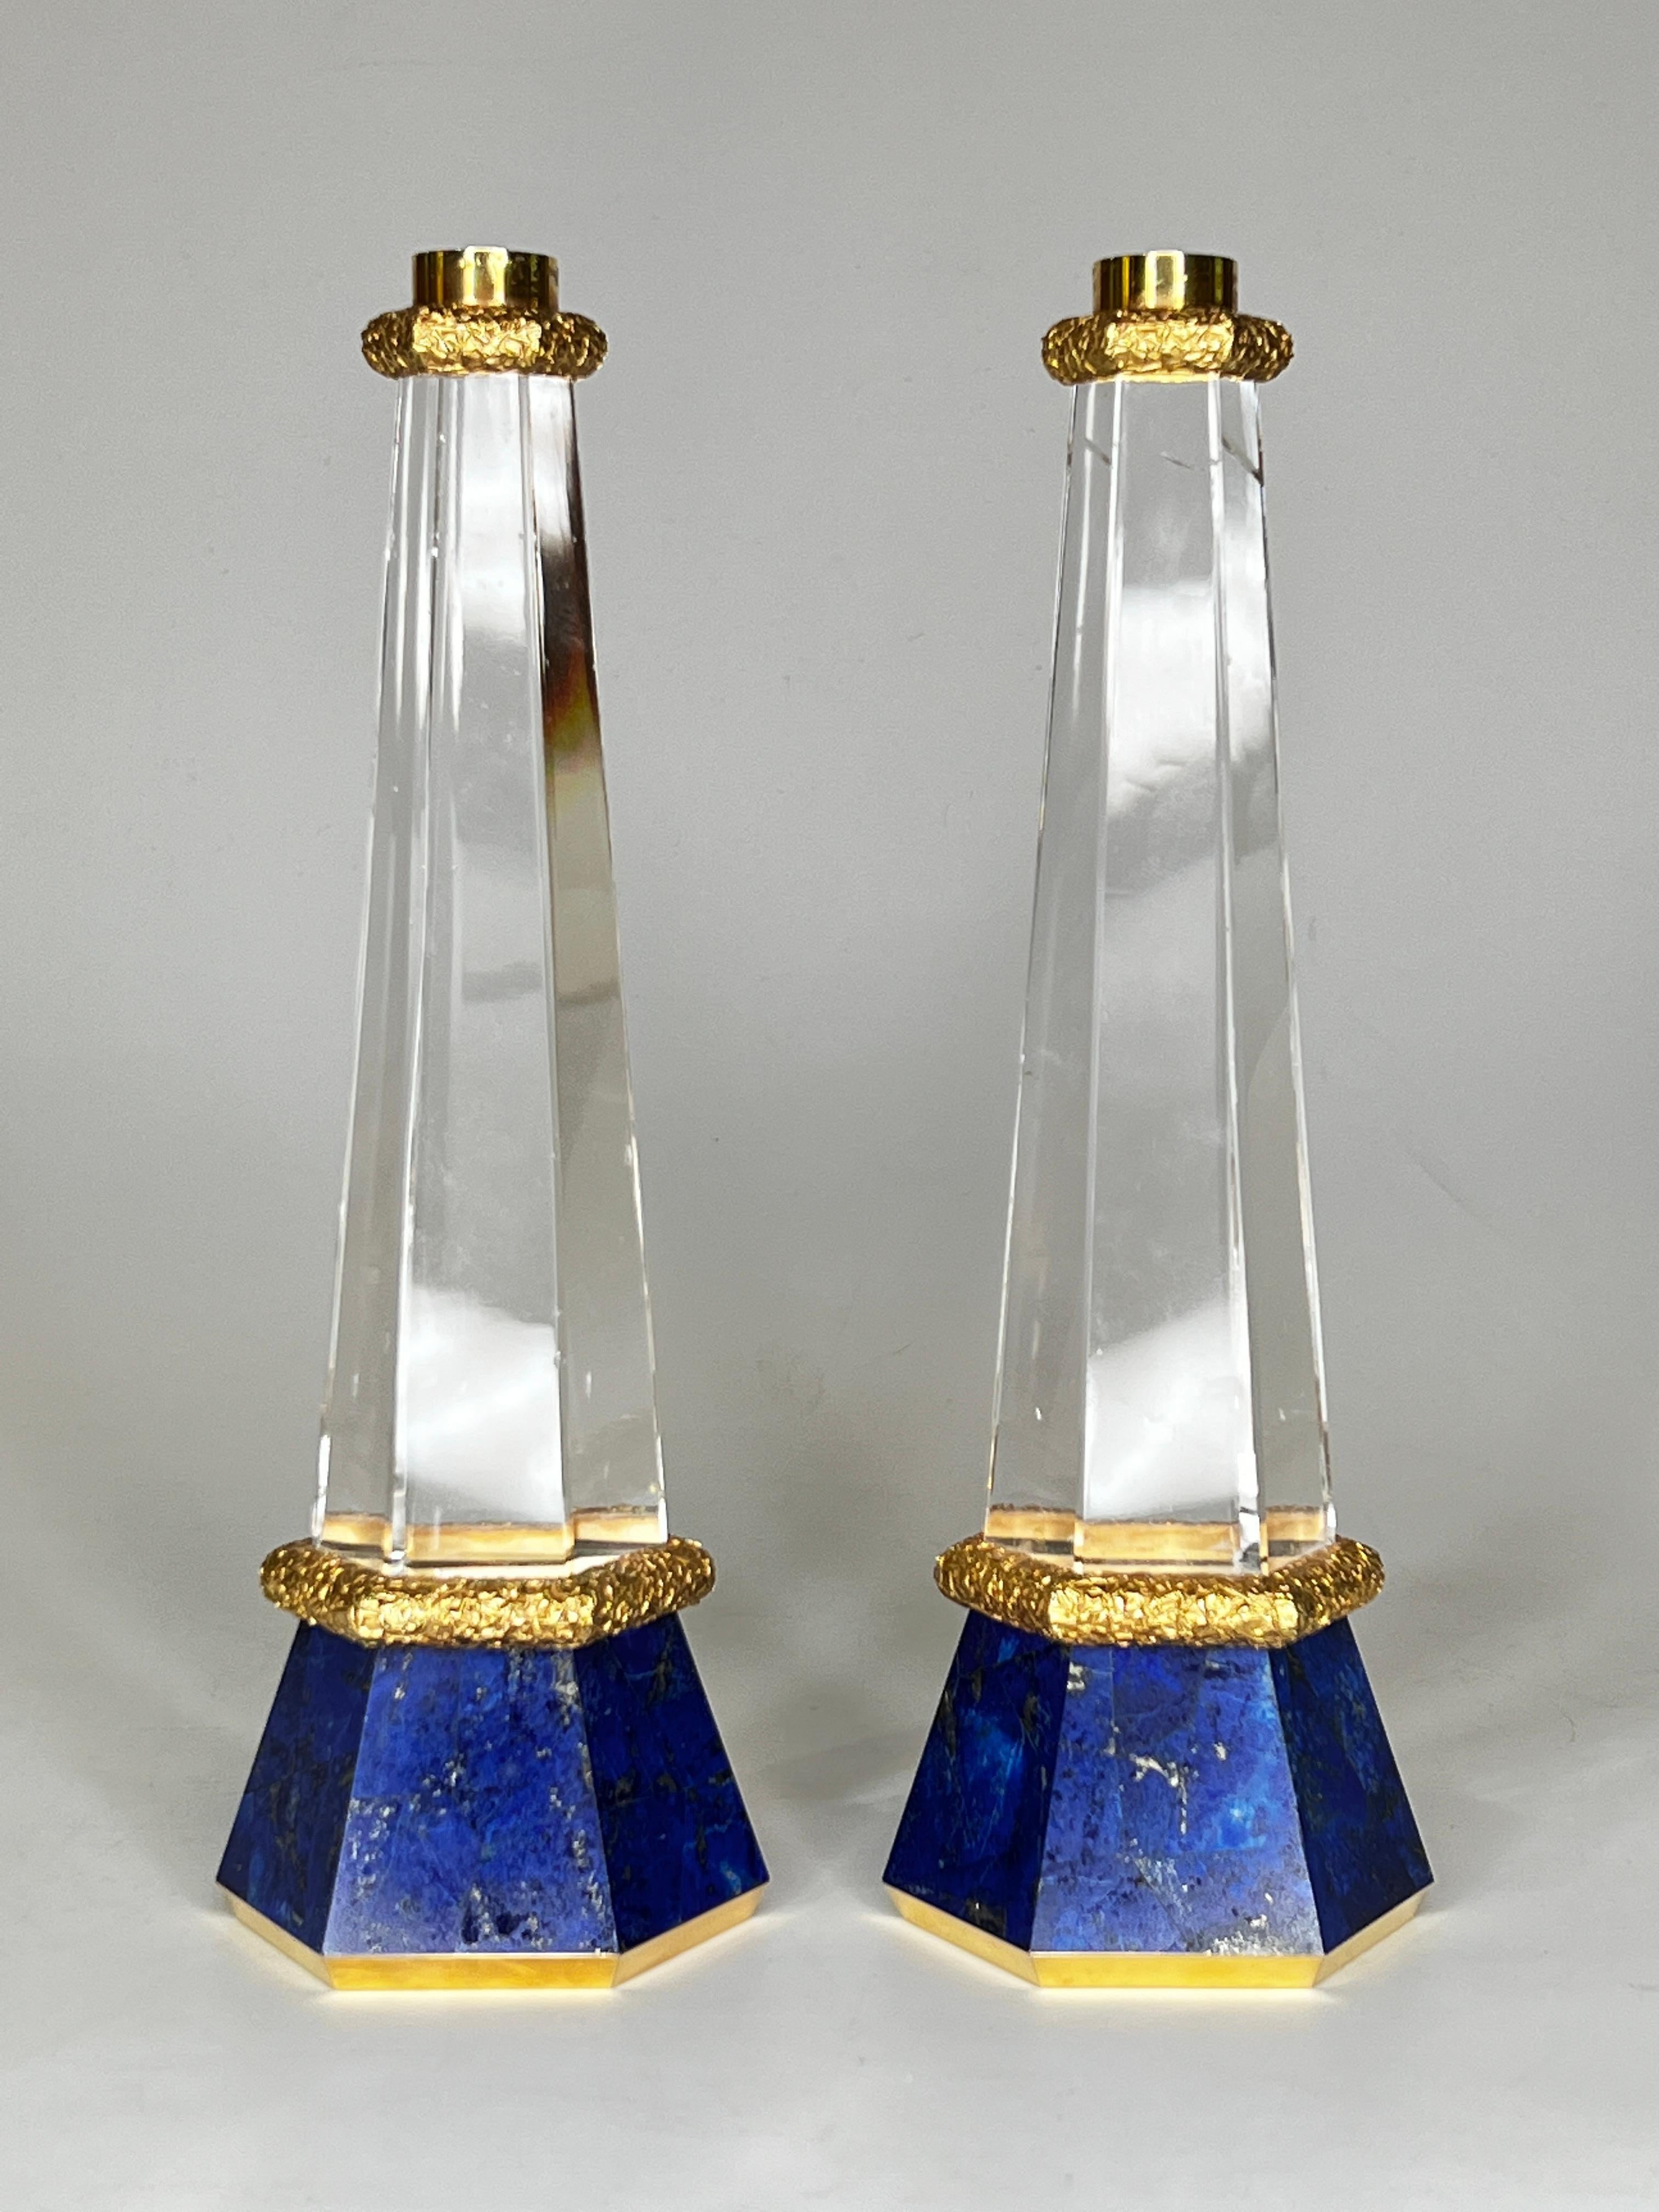 Our wonderful French candlesticks with hexagonal shape feature gilt metal bases with lapis lazuli stone veneer, exceptional rock crystal standards and gilt metal candle holders. The quality of the quartz is exceptional with very few occlusions. Each